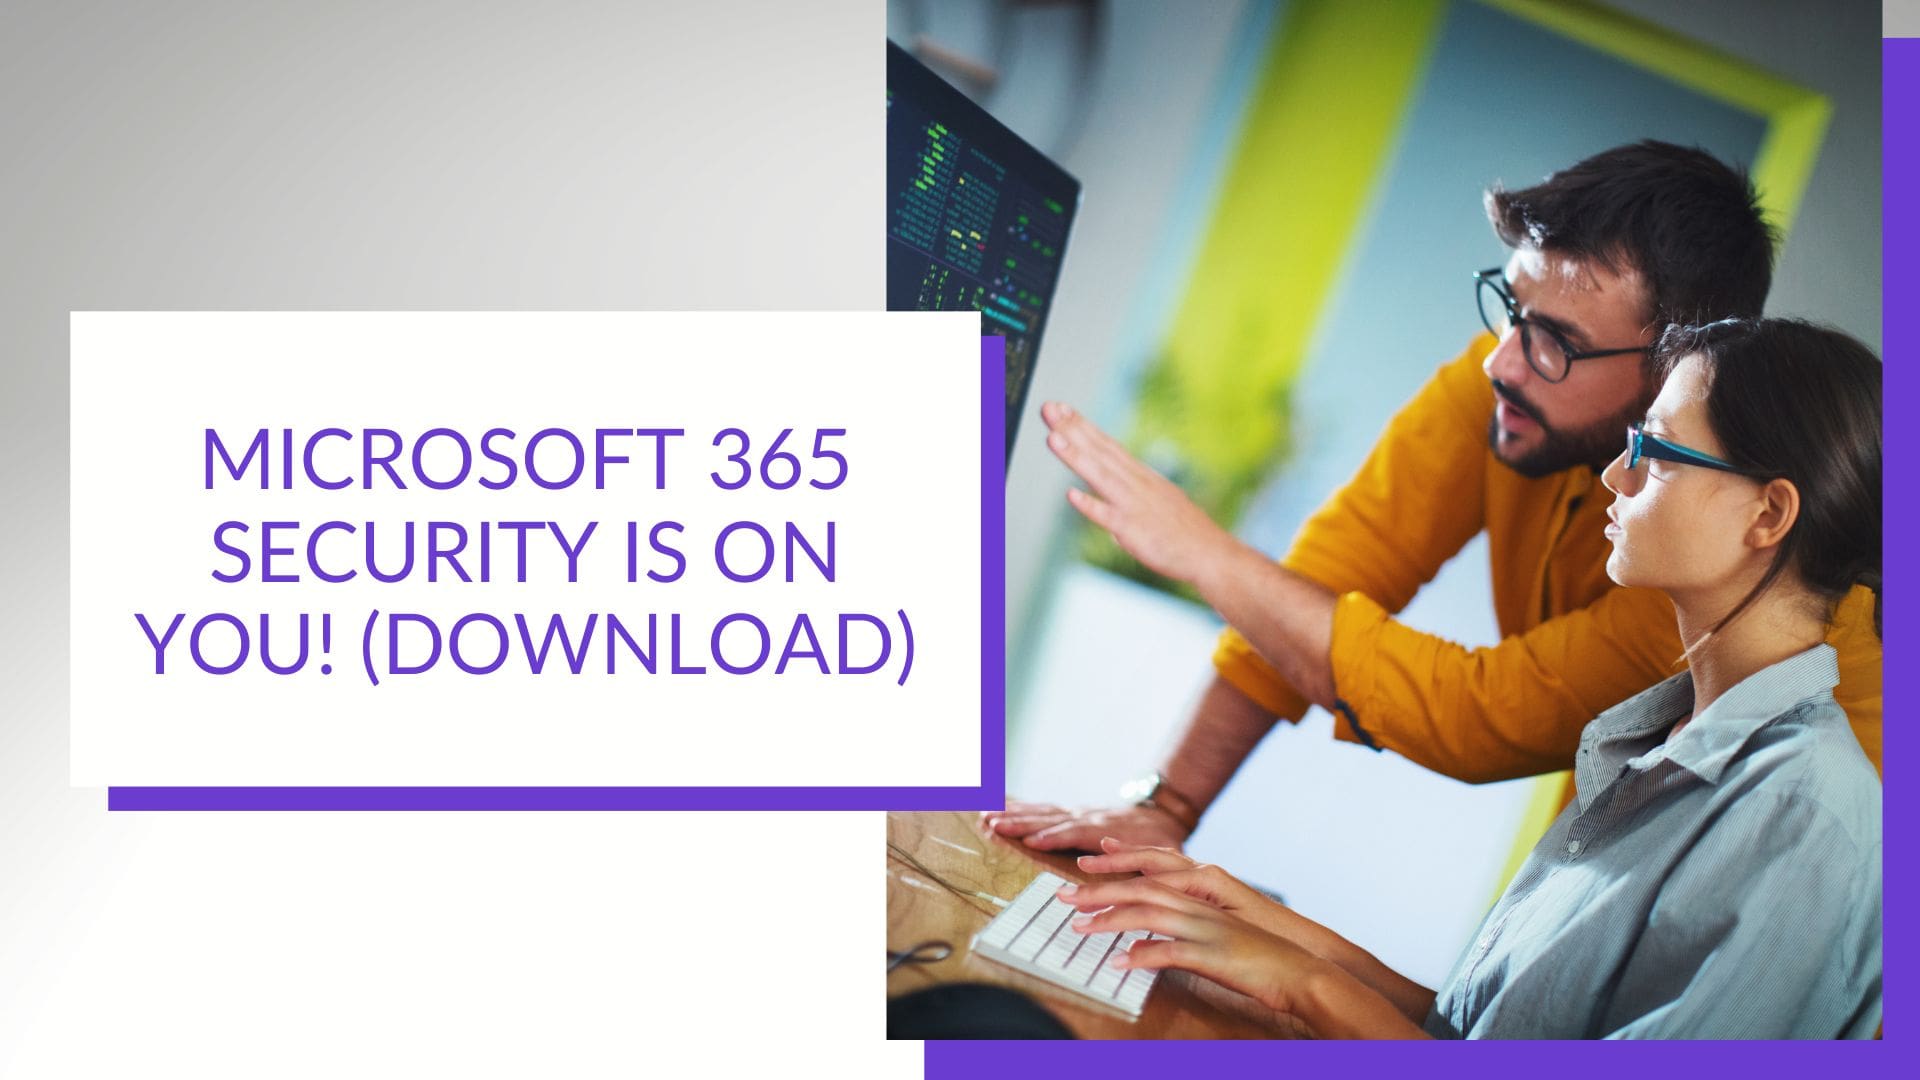 Microsoft 365 Shared Responsibility Cloud Security